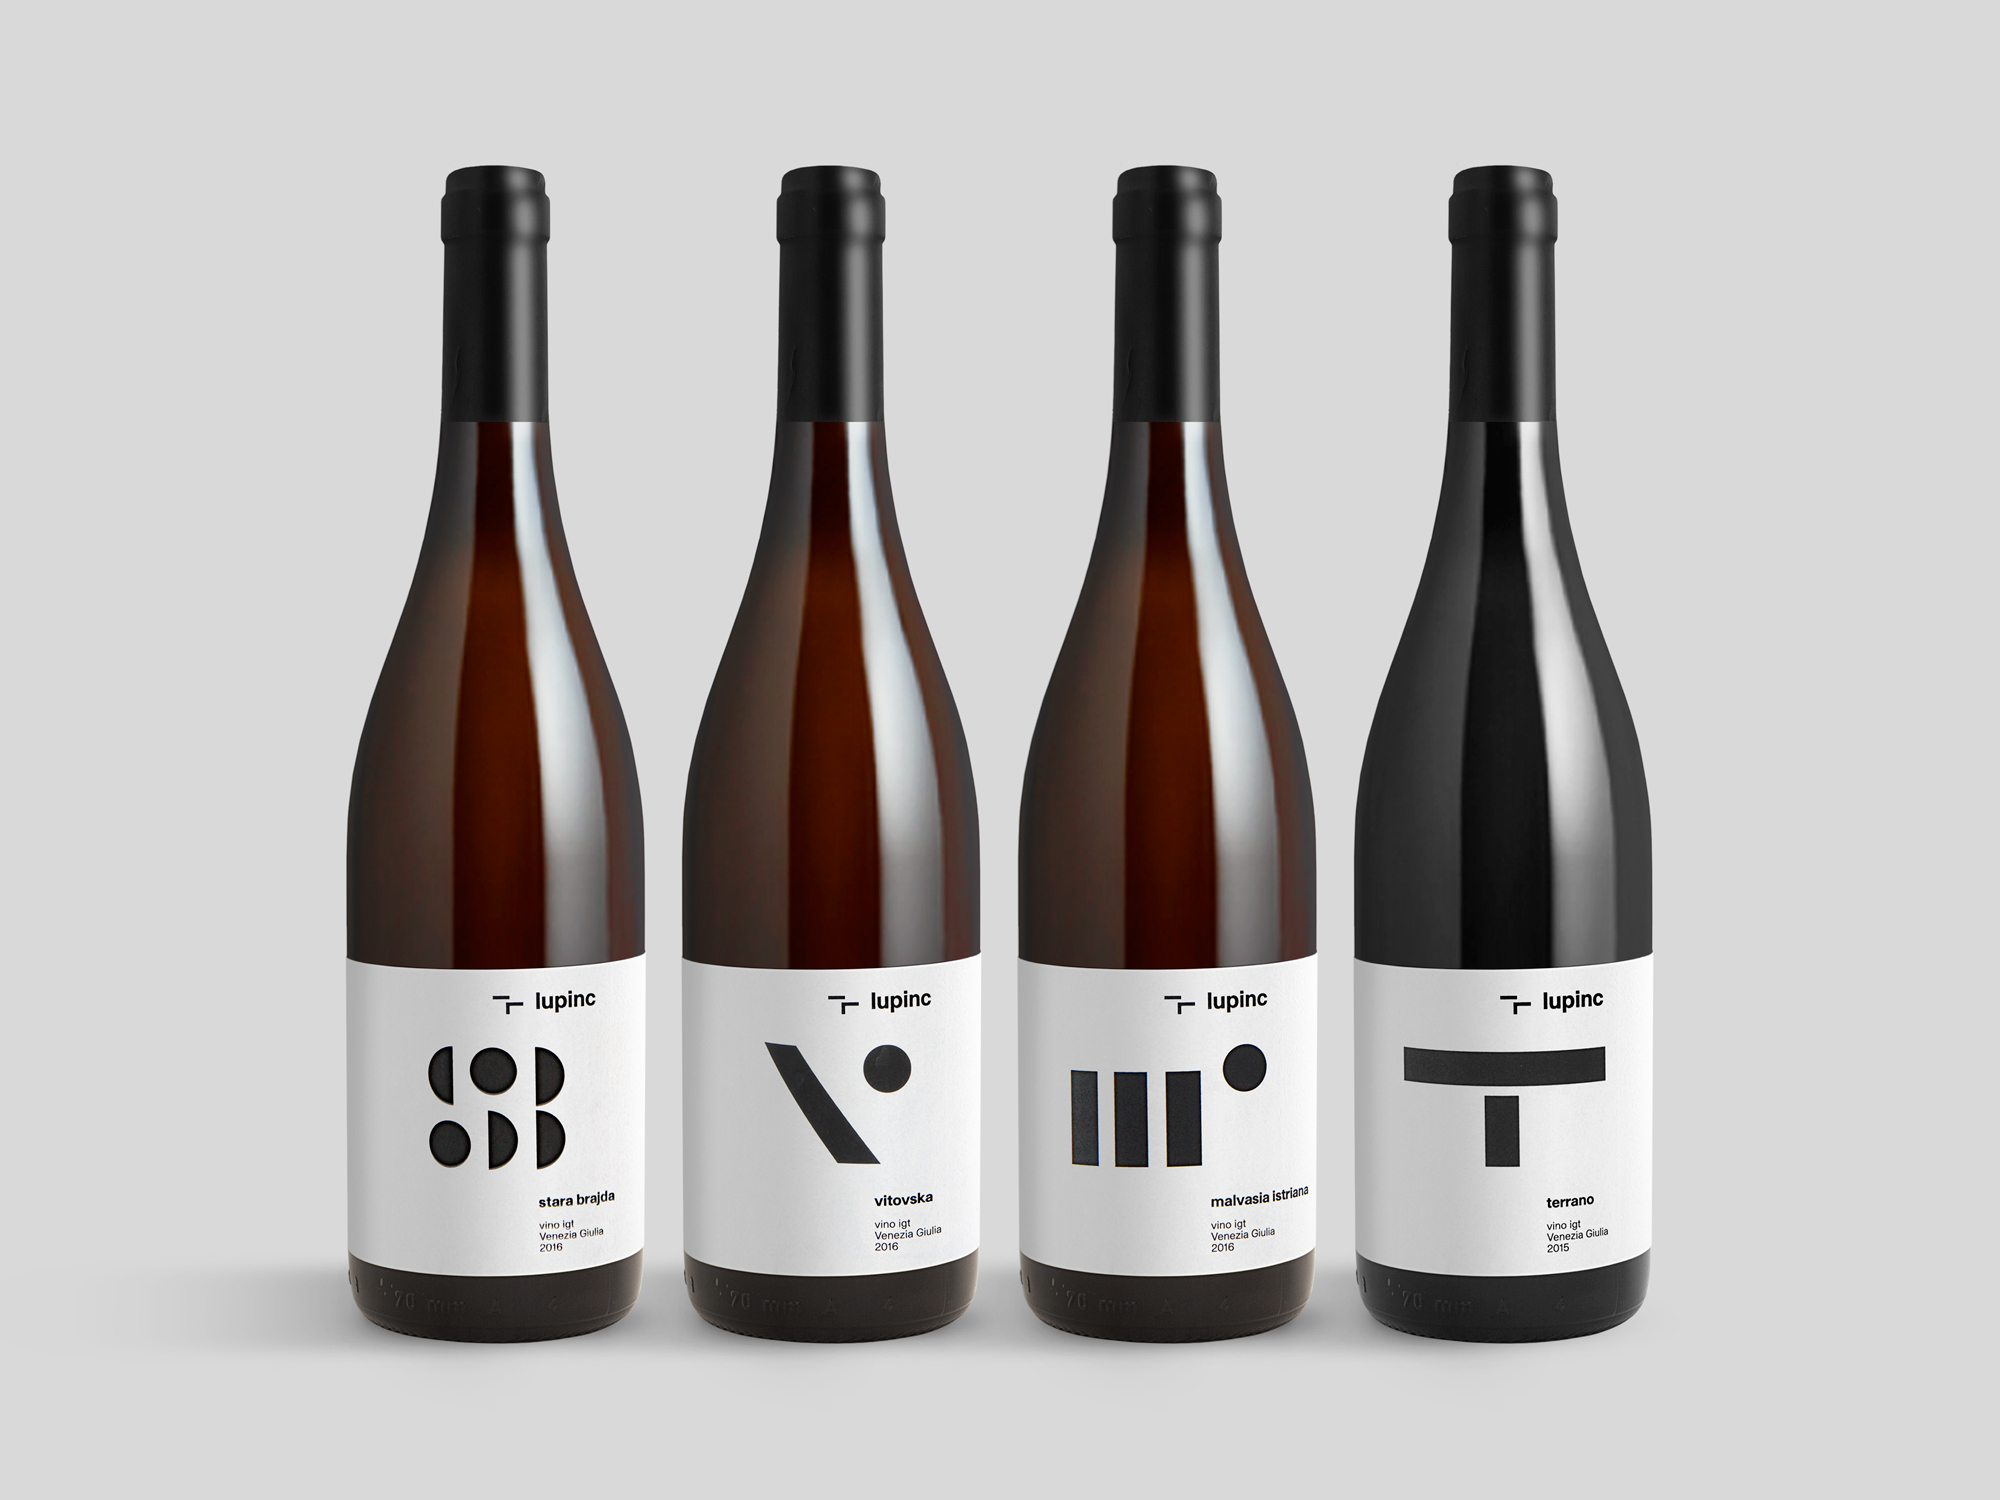 Visual Identity, Labels and Packaging Design for Lupinc, a Wine Estate from Italy